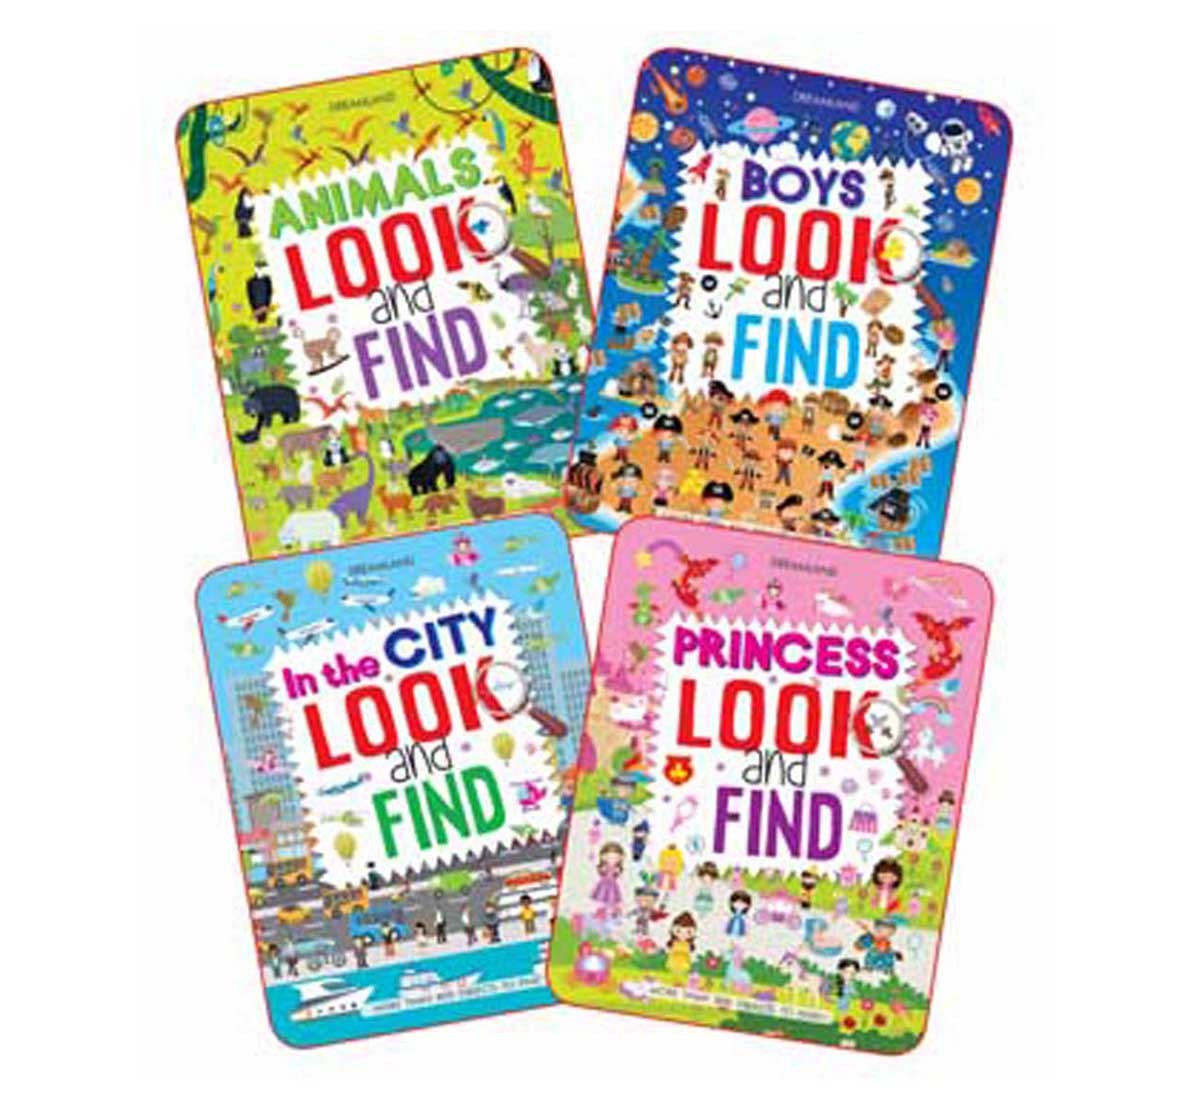 Dreamland Paperback Look and Find Series Set of Books for Kids 4Y+, Multicolour